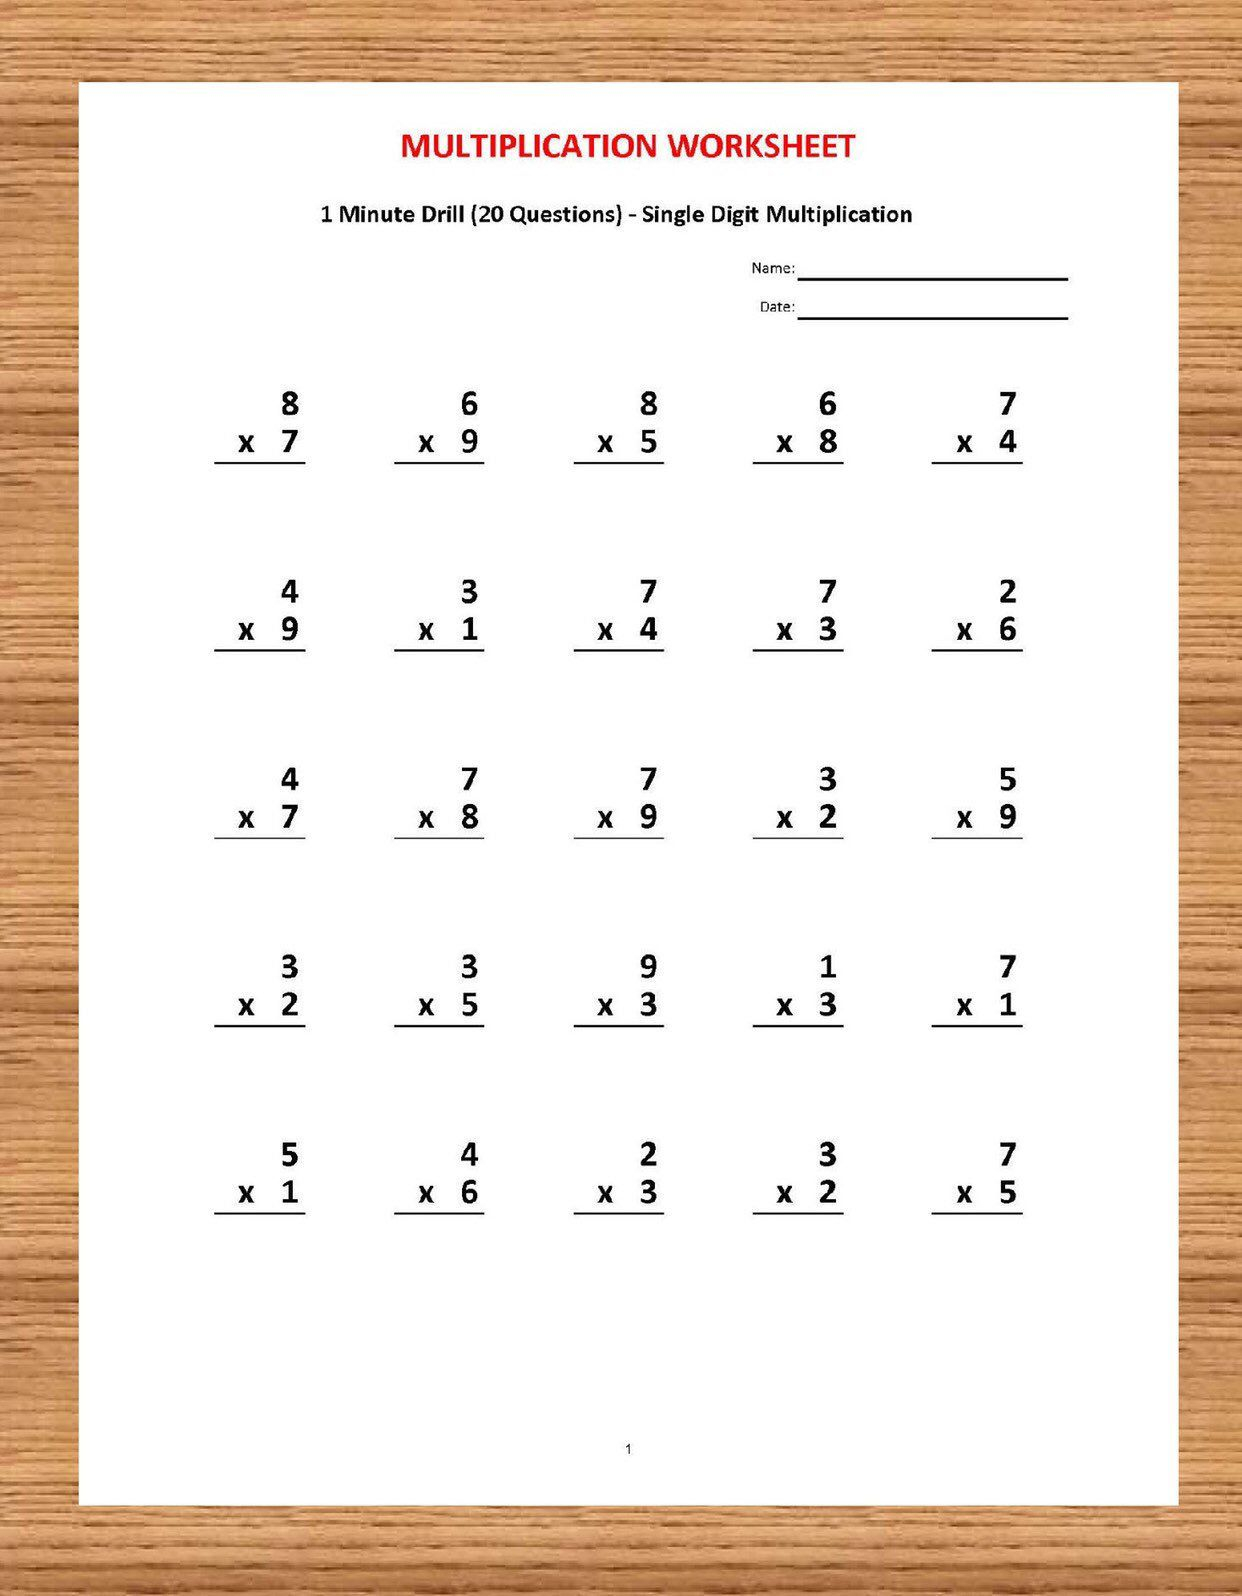 Multiplication 1 Minute Drill V 10 Math Worksheets With